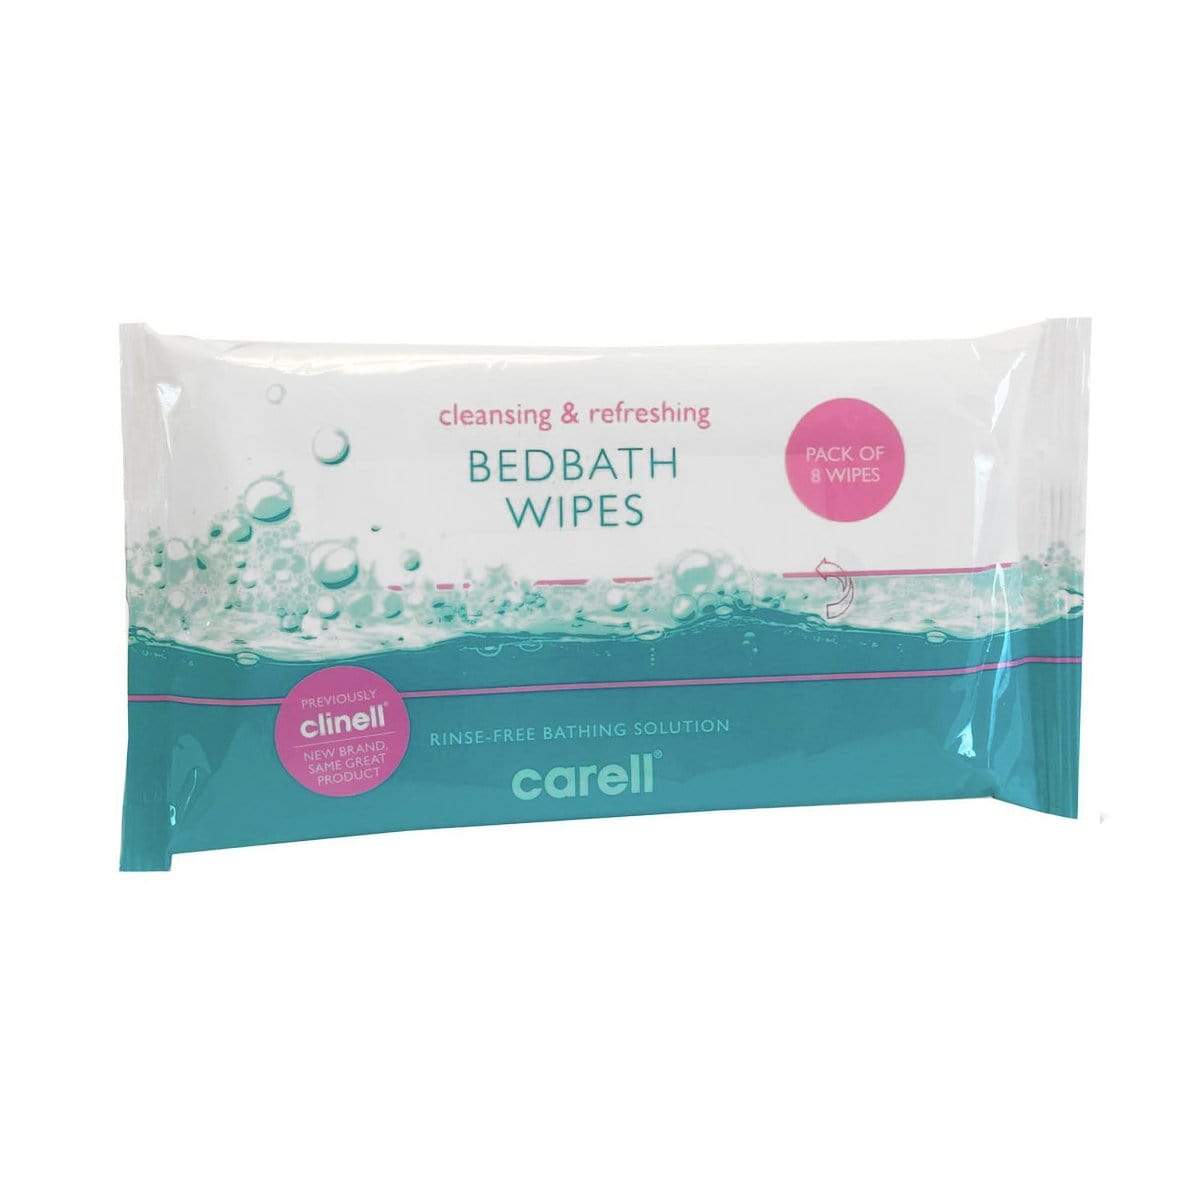 Clinell Body Wipes Clinell Carell Bed Bath Wipes